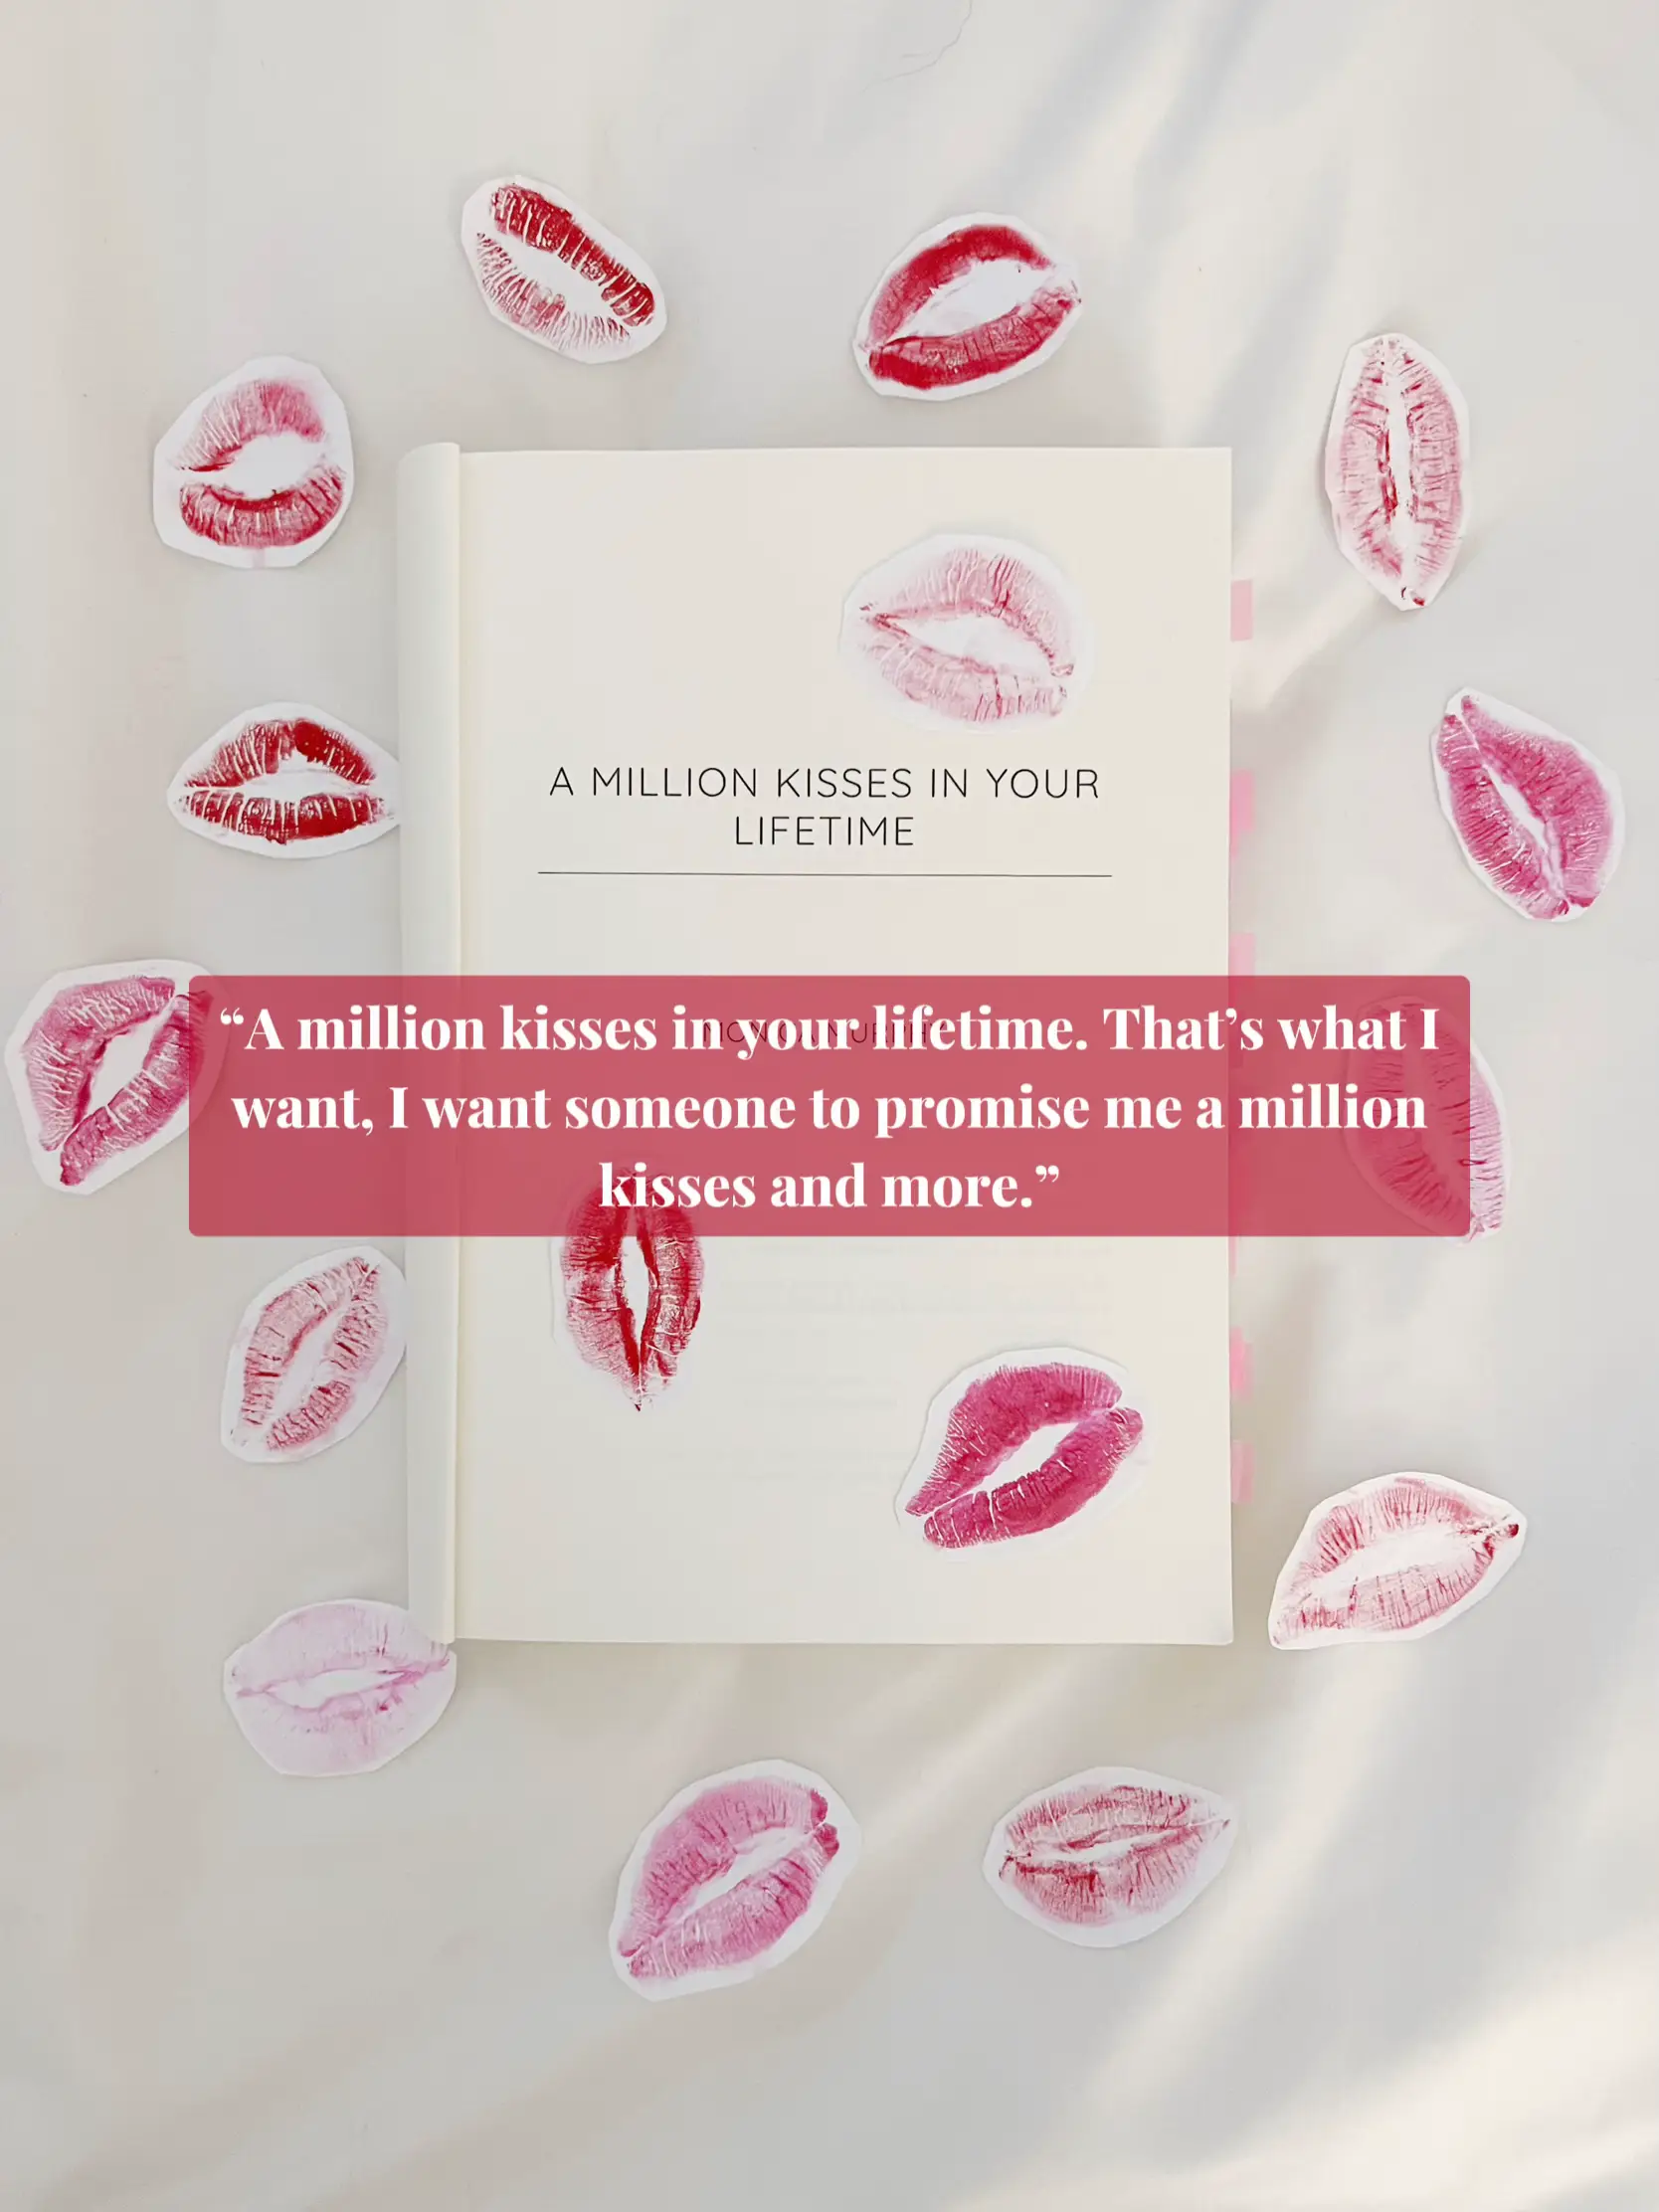  A pink lipstick ad with a quote from a movie.